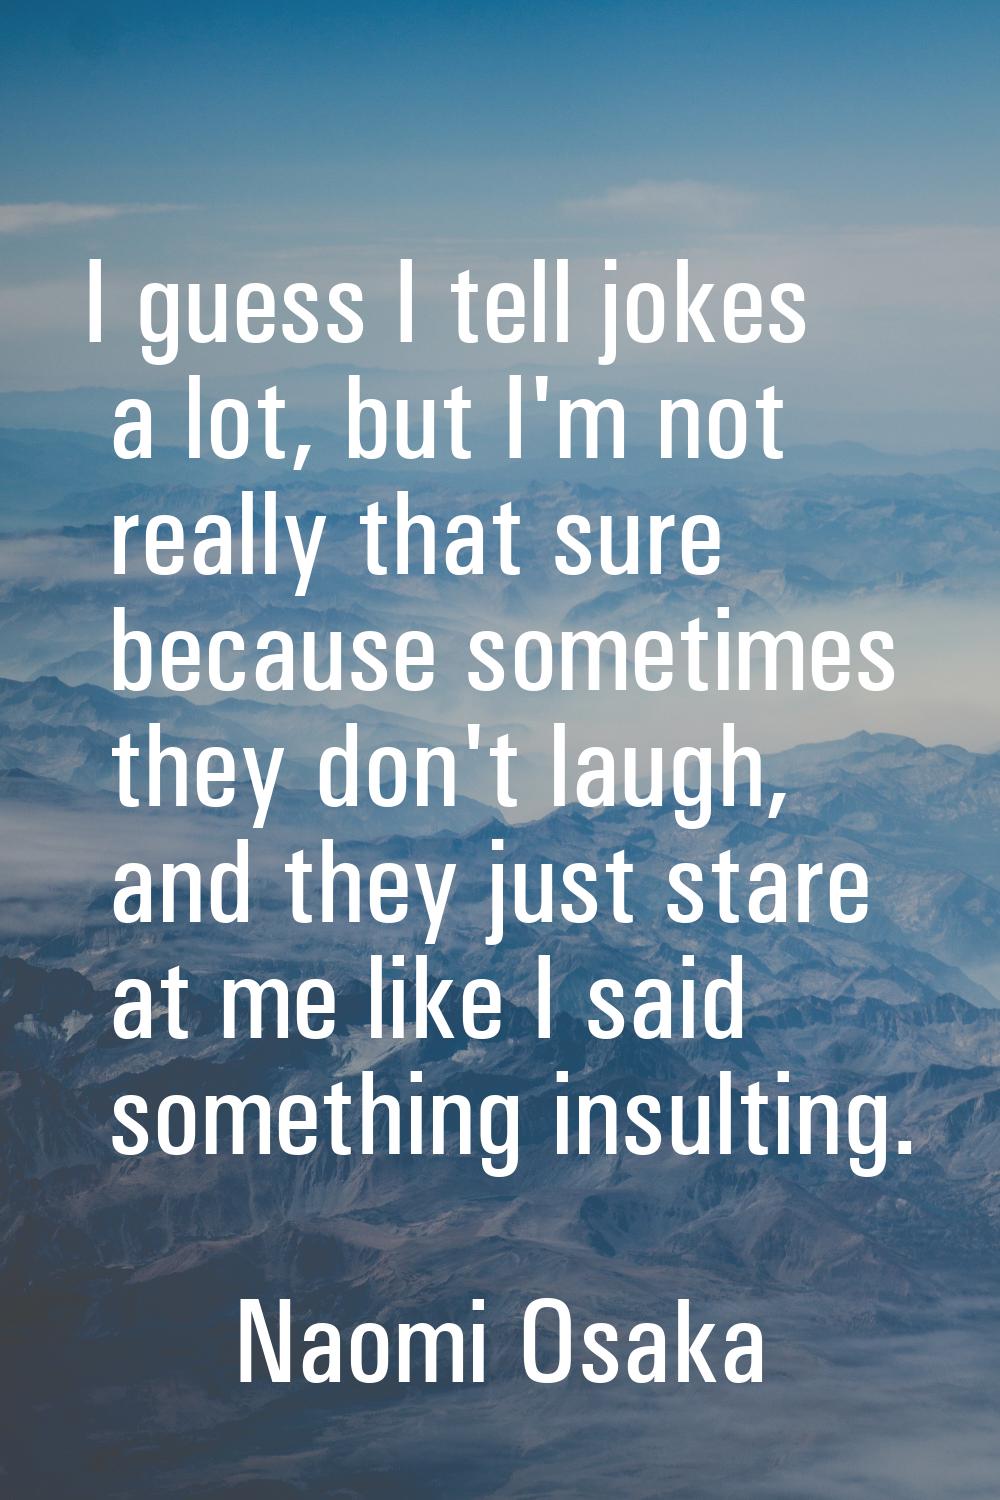 I guess I tell jokes a lot, but I'm not really that sure because sometimes they don't laugh, and th